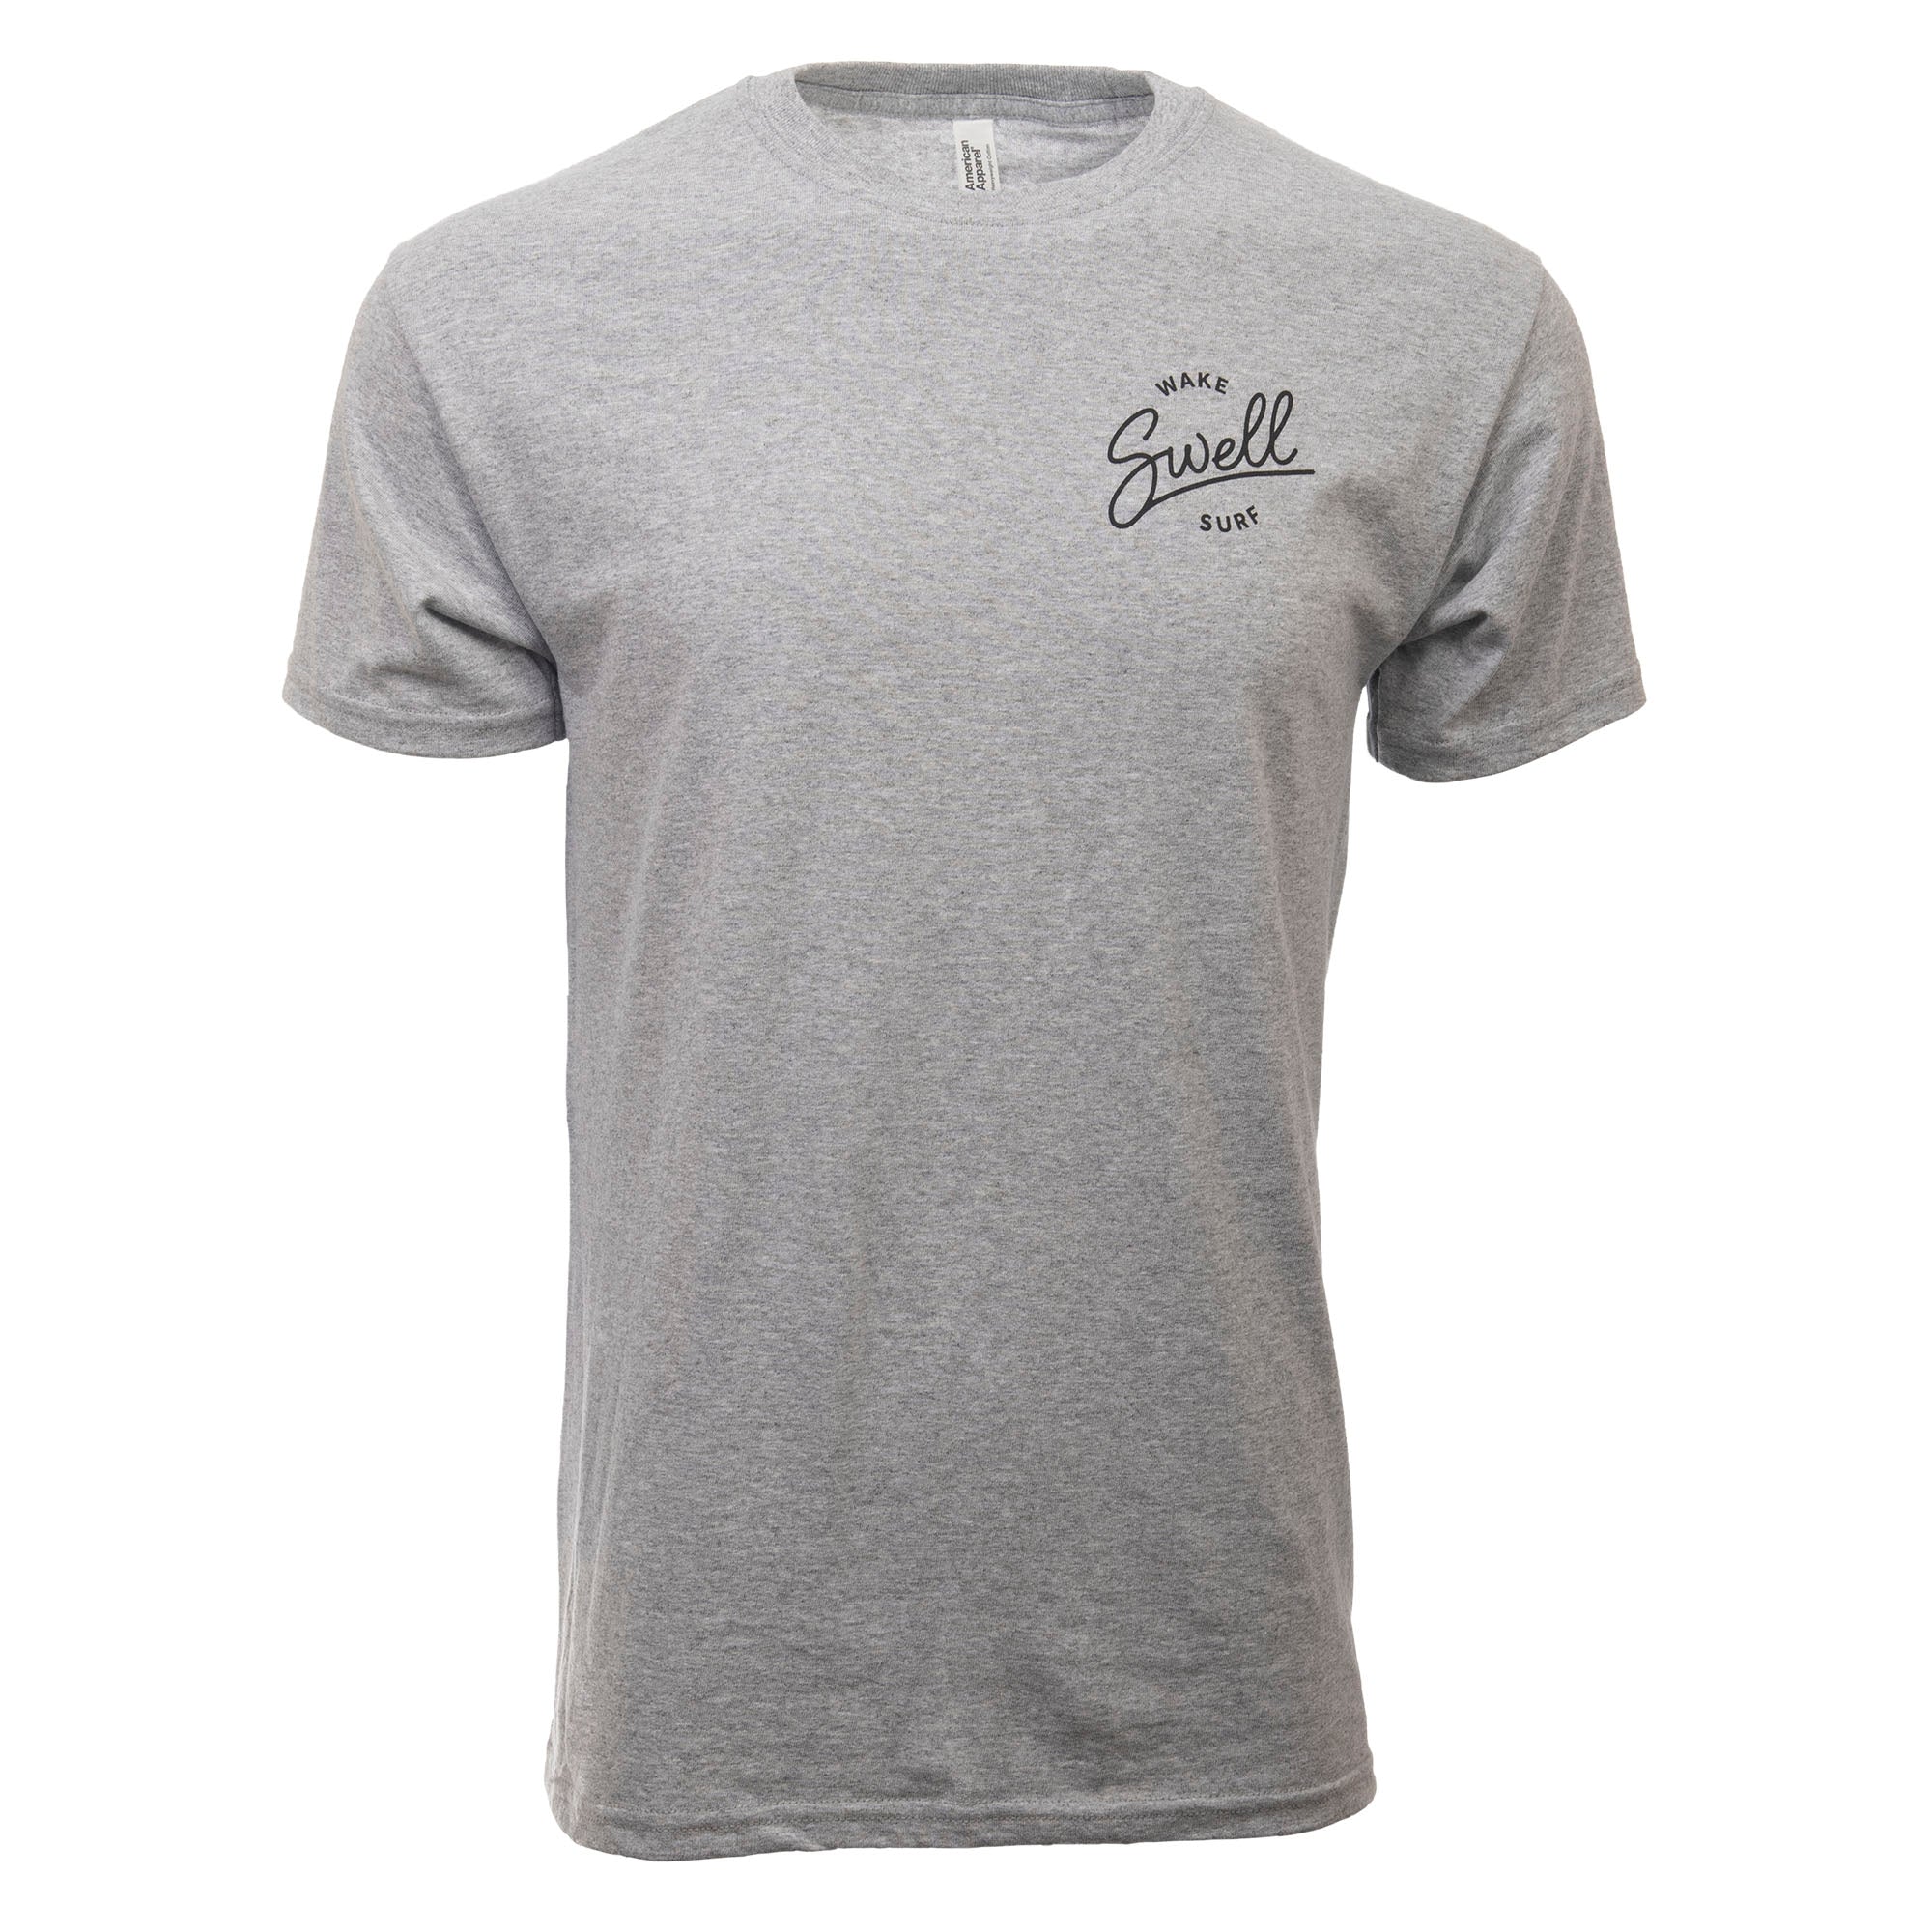 SWELL Wakesurf Co T-Shirt - Classic Fit Cotton Tee